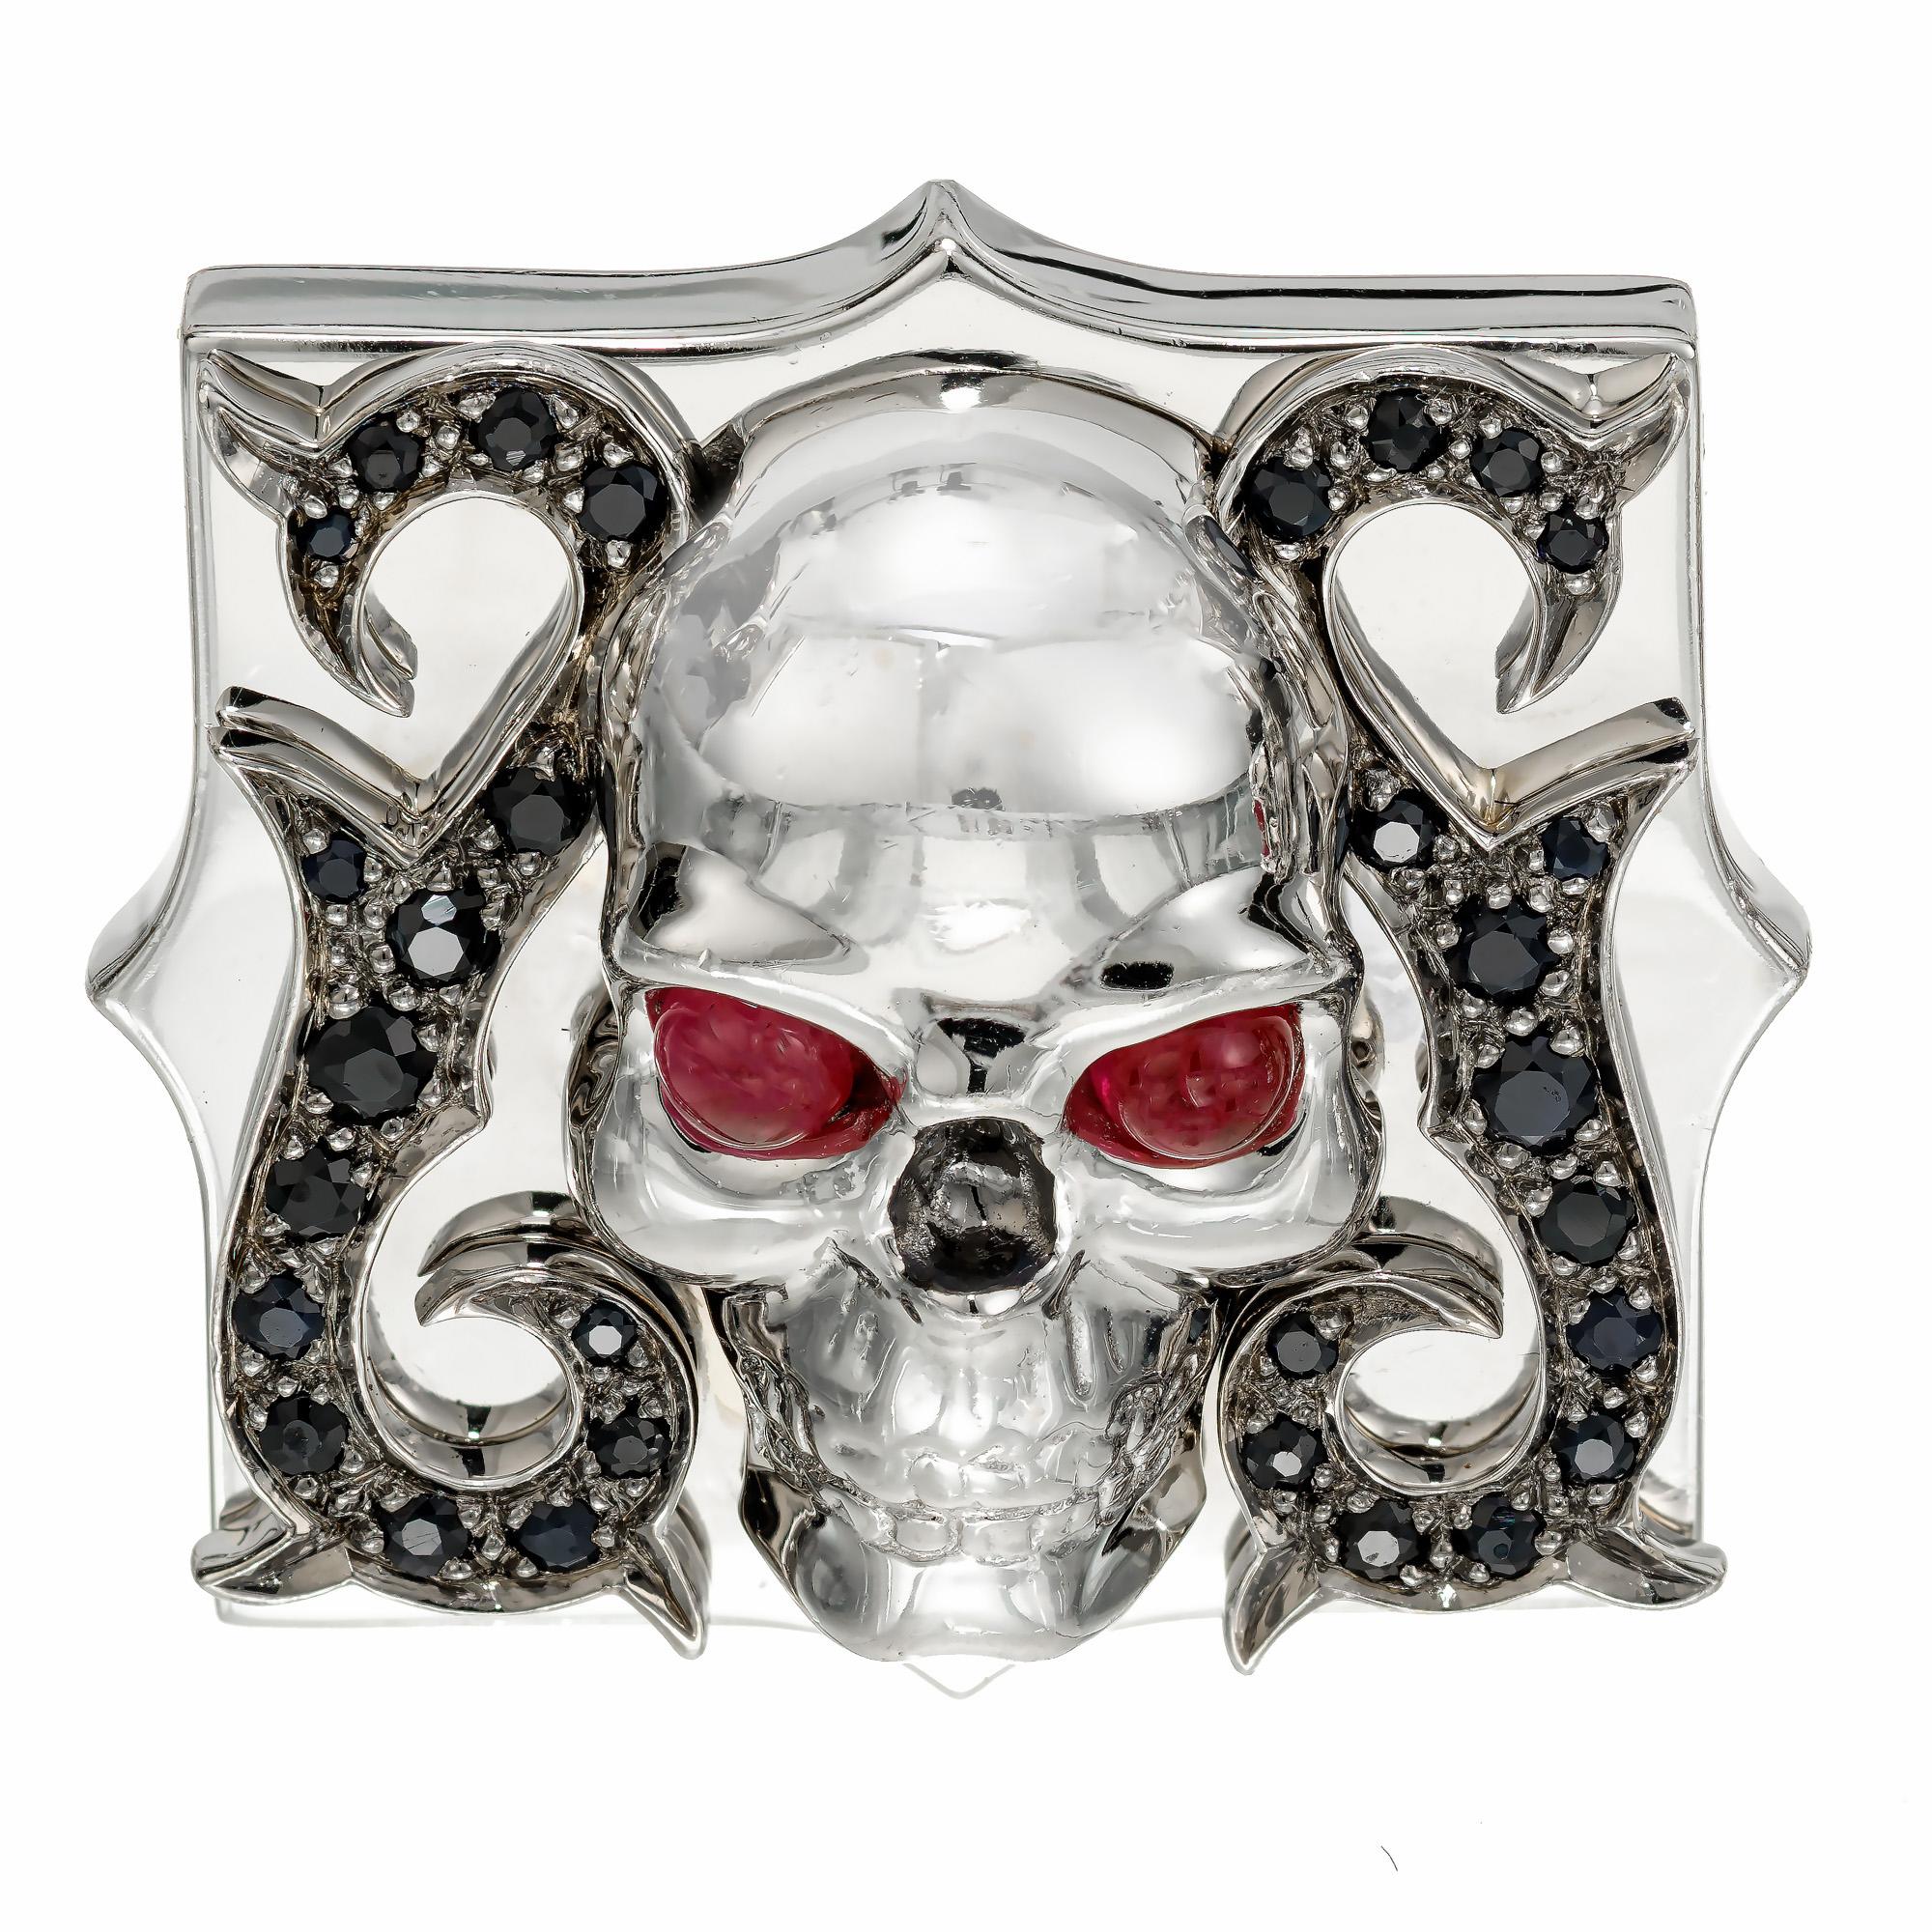 Stephen Webster 18k white gold heavy solid 18k white gold skull cufflinks. 4 cabochon ruby eyes accented with 60 round sapphires. 

4 round cabochon Rubies 3mm
60 round sapphires, approx. total weight .60cts
18k white gold
Hallmark: SW 26048
41.0